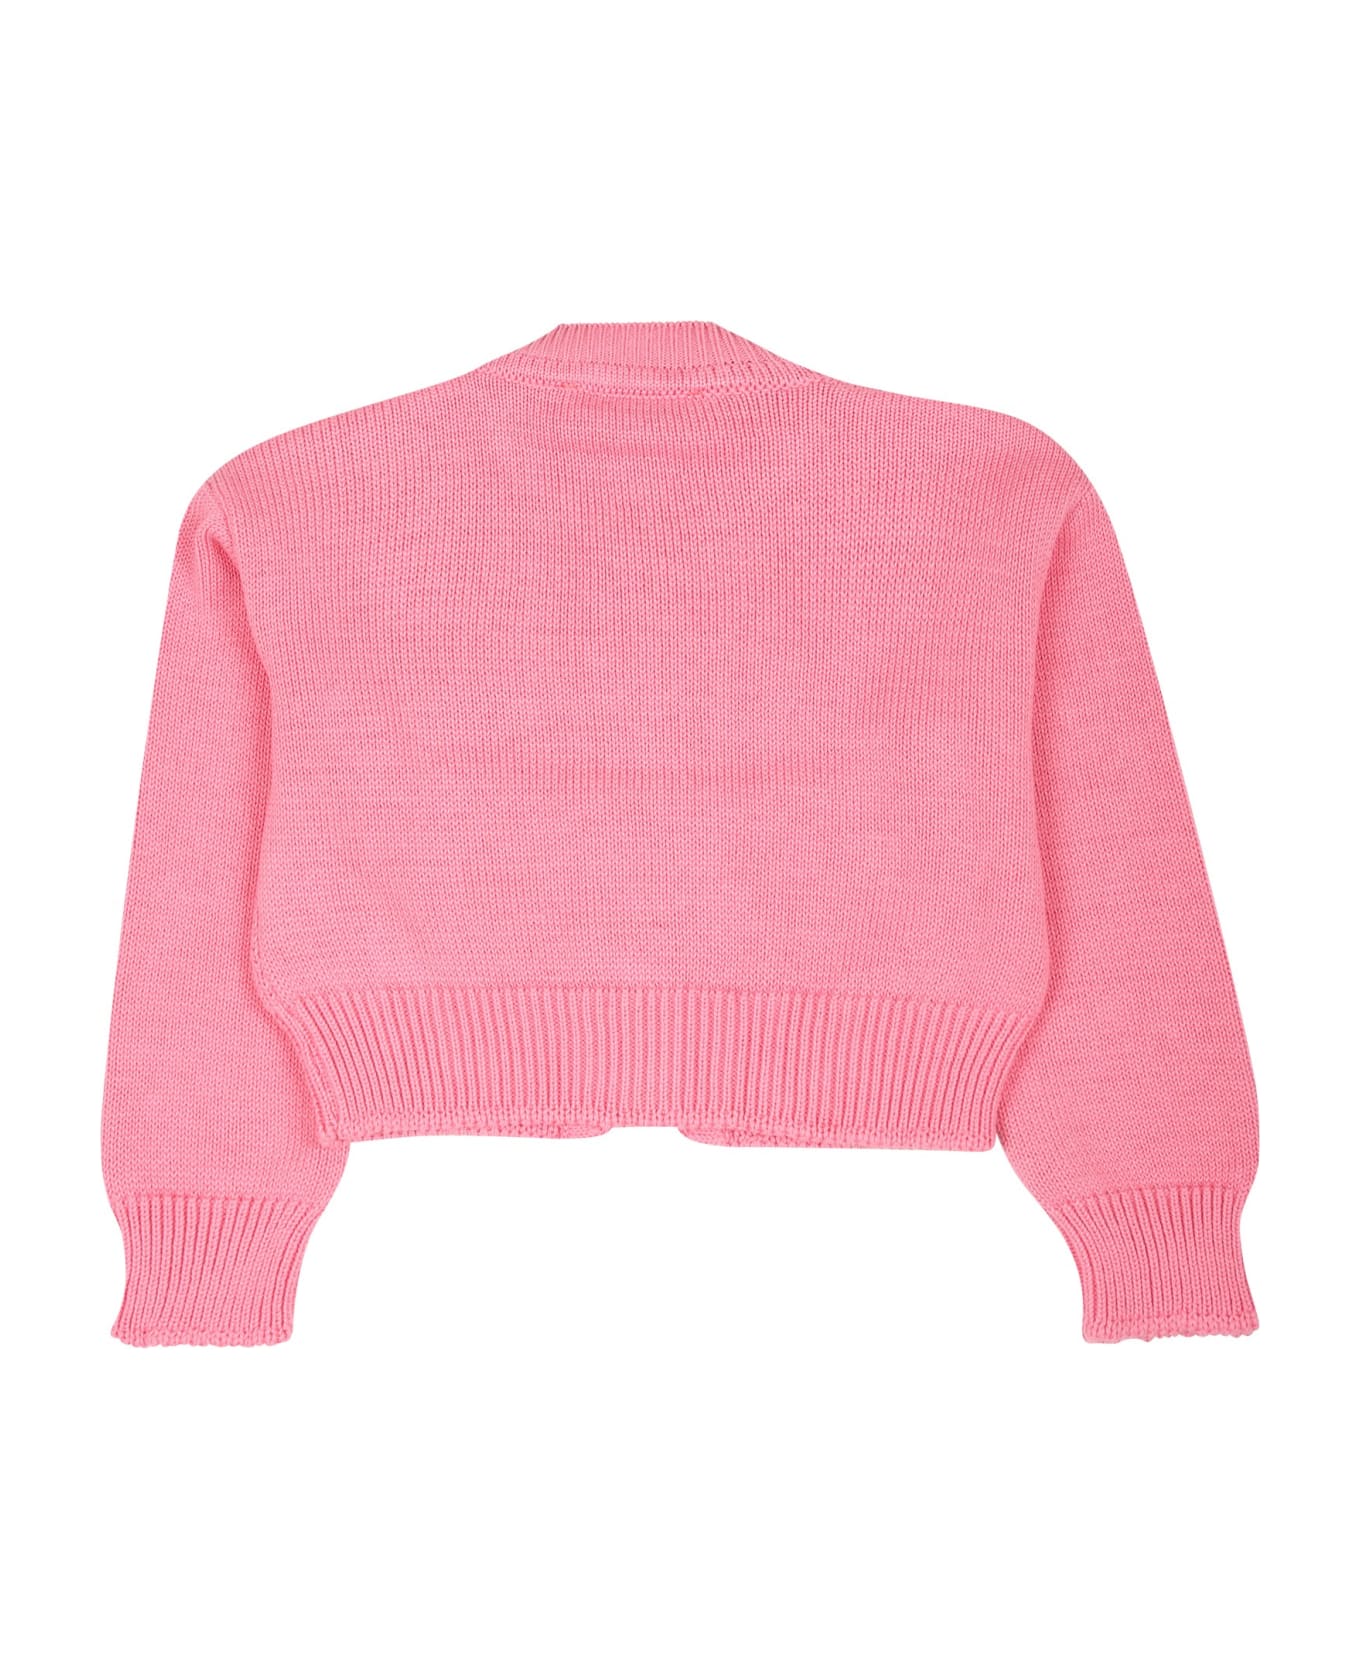 MSGM Pink Cardigan For Baby Girl With Cherry - Pink